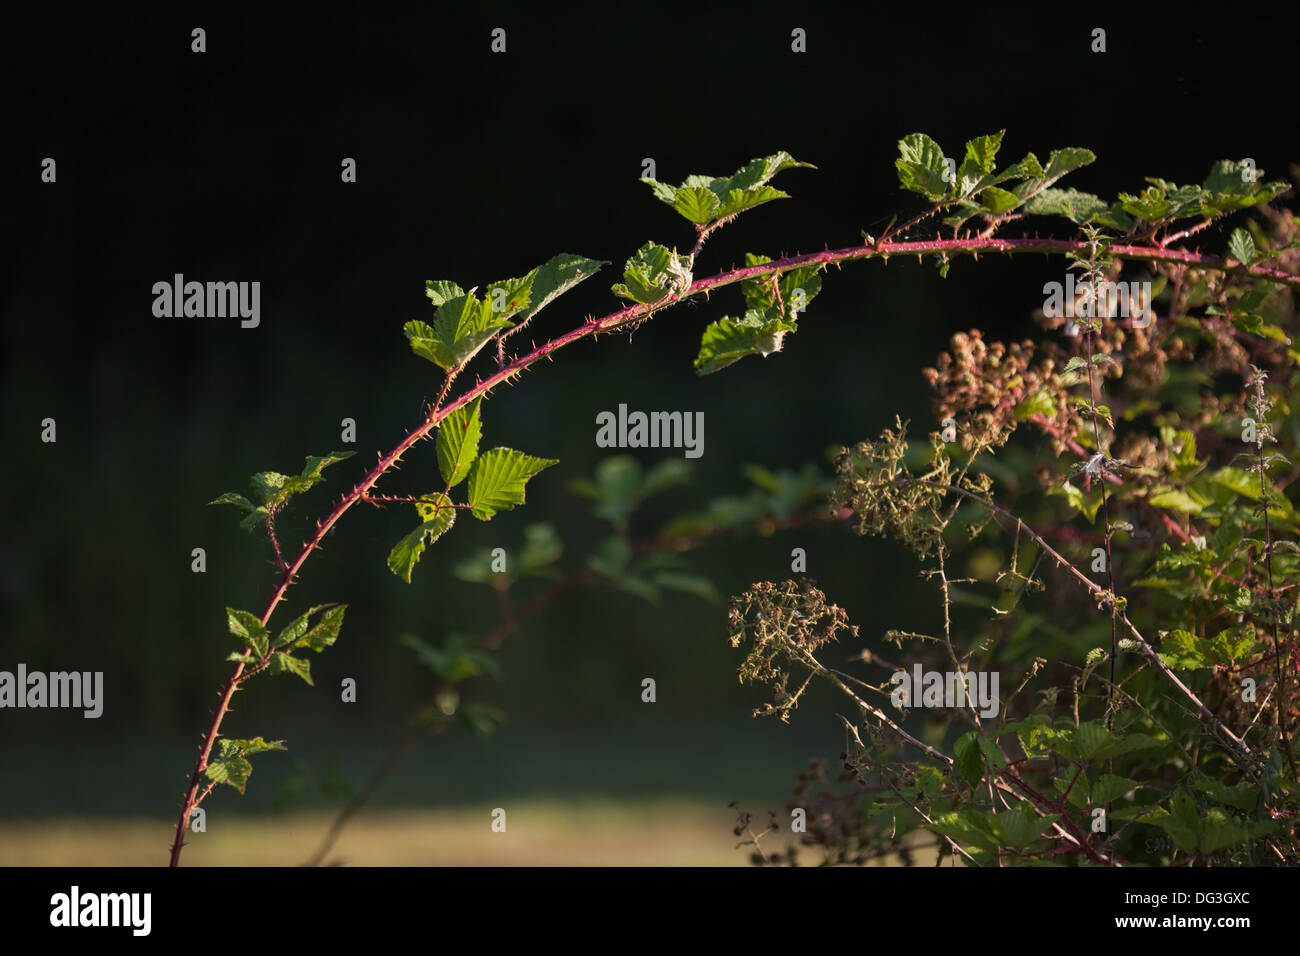 Blackberry, or Bramble (Rubus fruticosus). New vigorous growth, which allows for branching out and rooting , forming new plant. Stock Photo